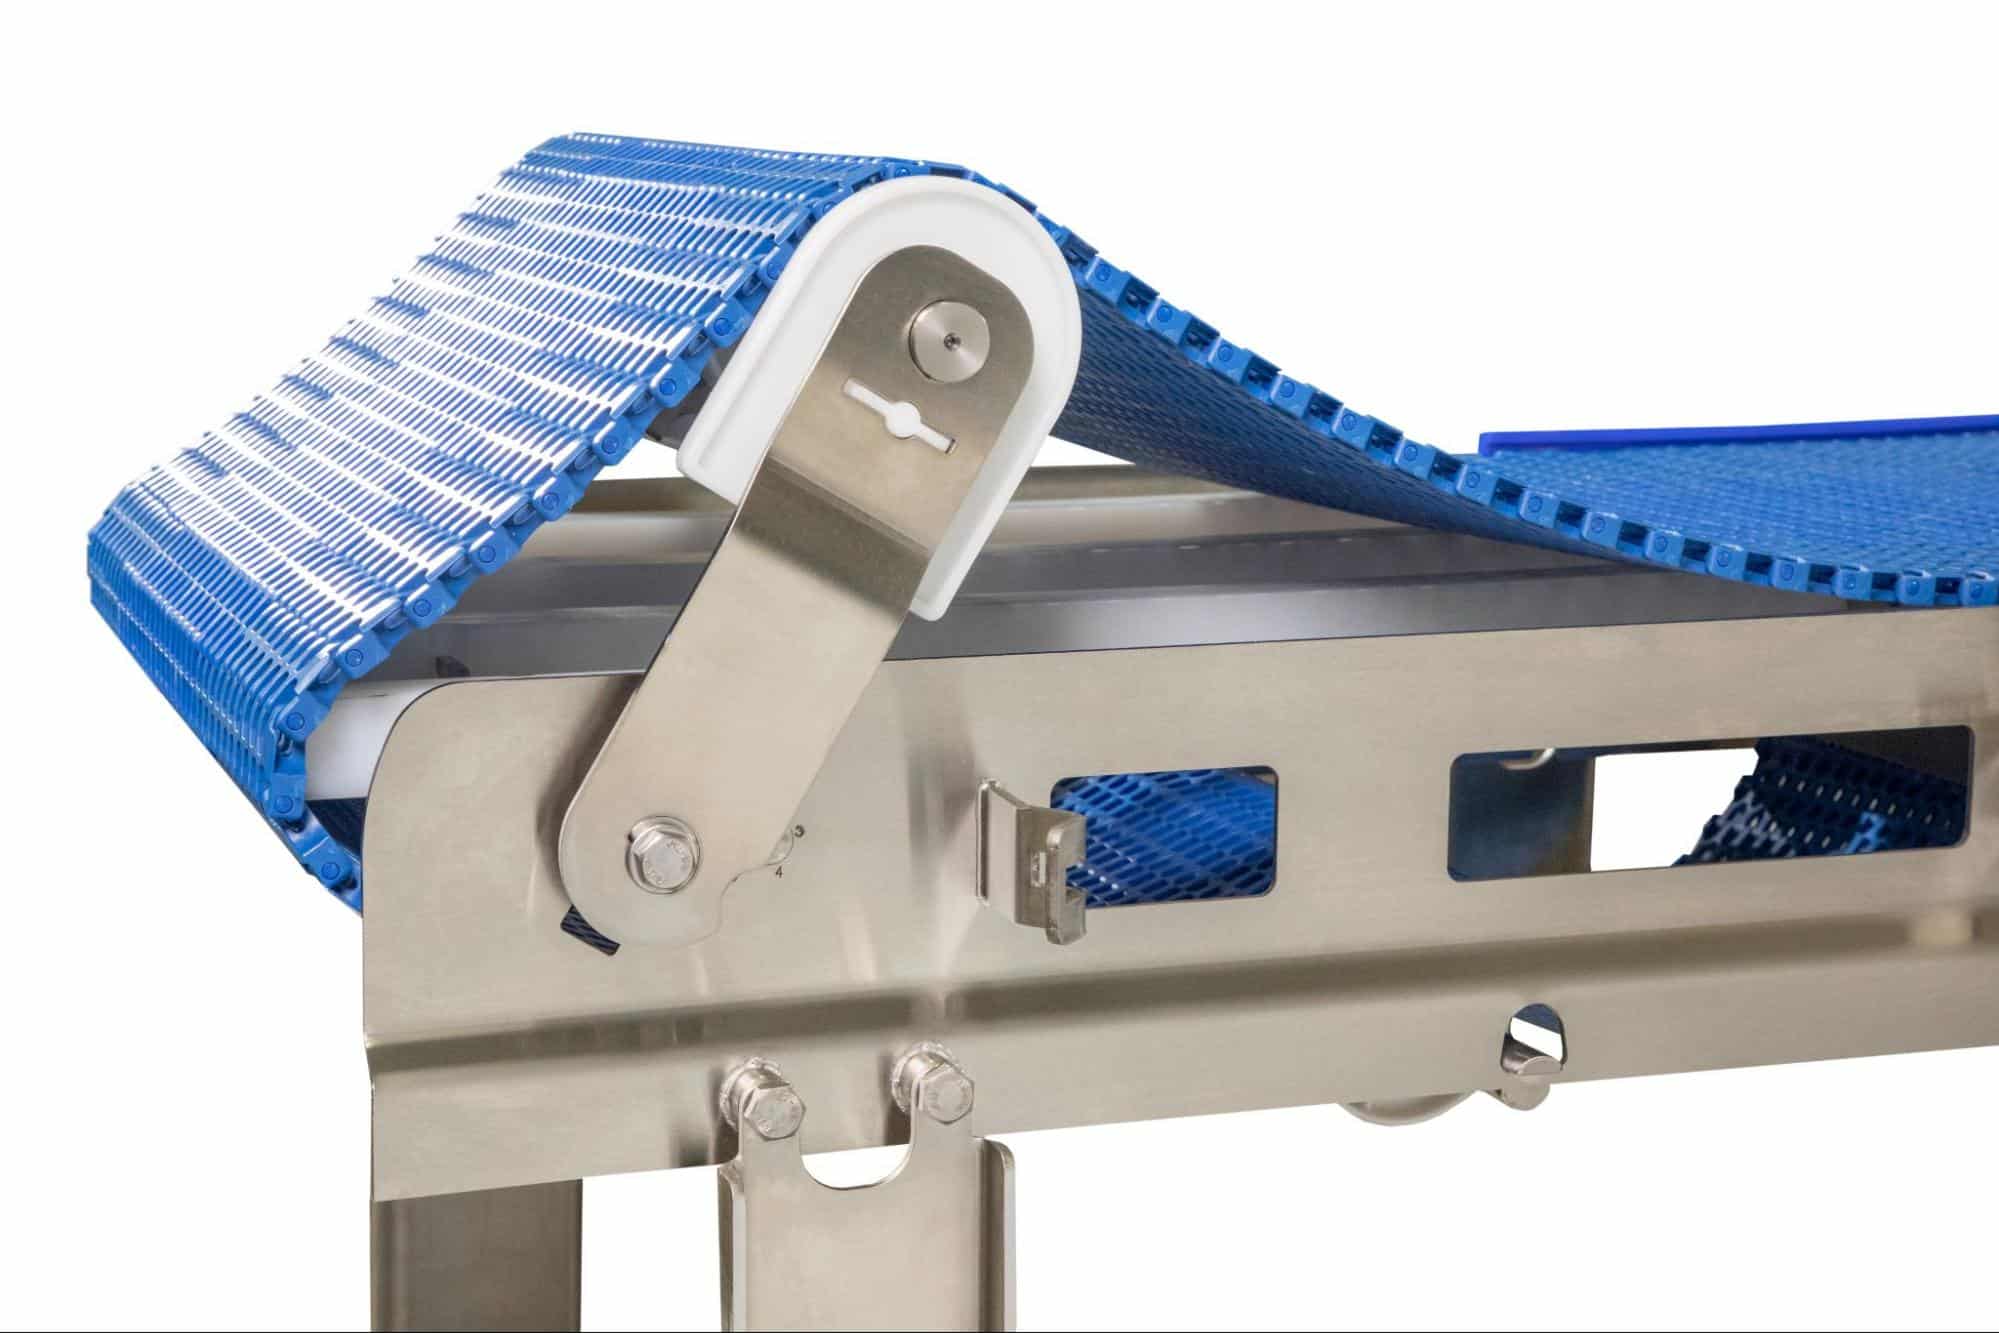 A modular AquaPruf conveyor from Dorner with a tip-up tail for easy cleaning.